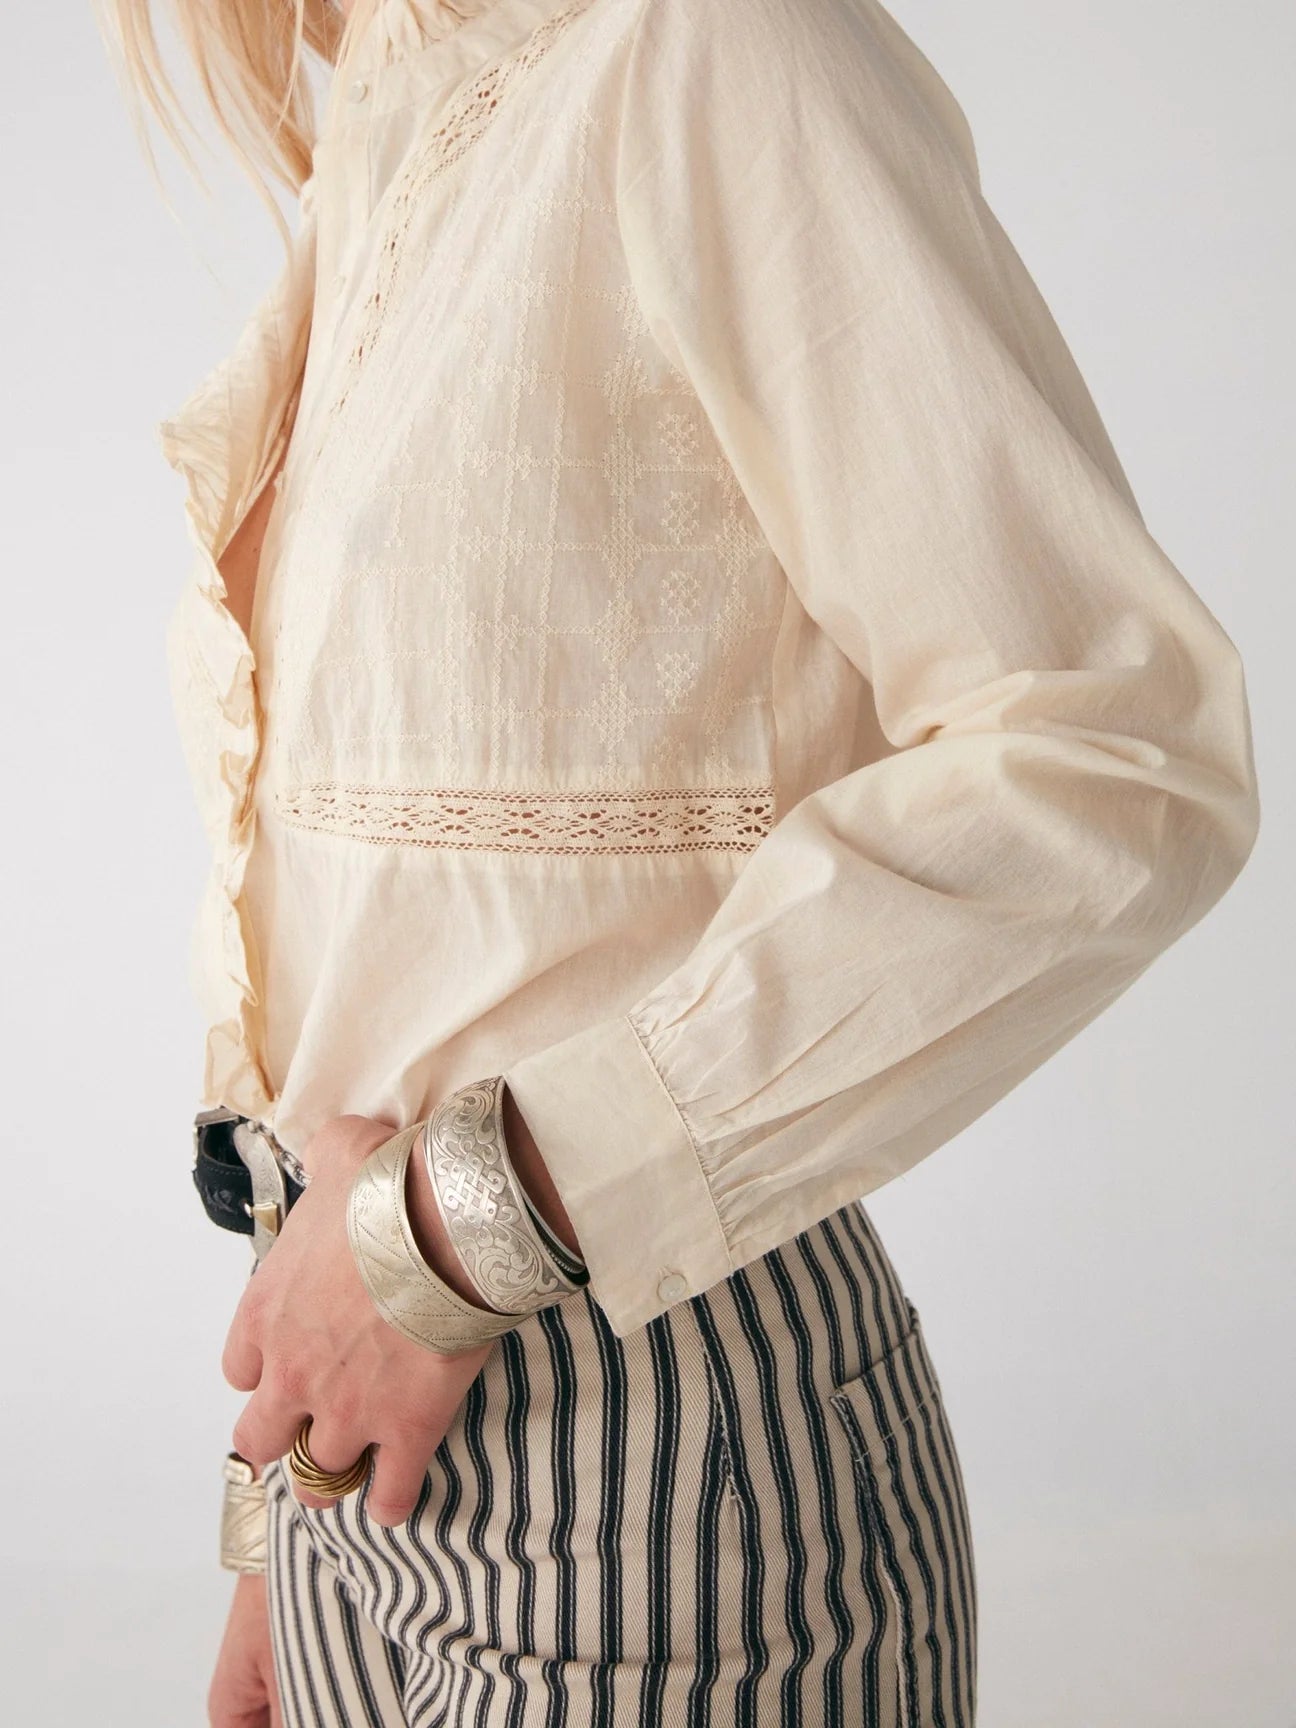 A woman wearing a Riya Blouse - Victorian Ivory by Maison Hotel and striped pants.